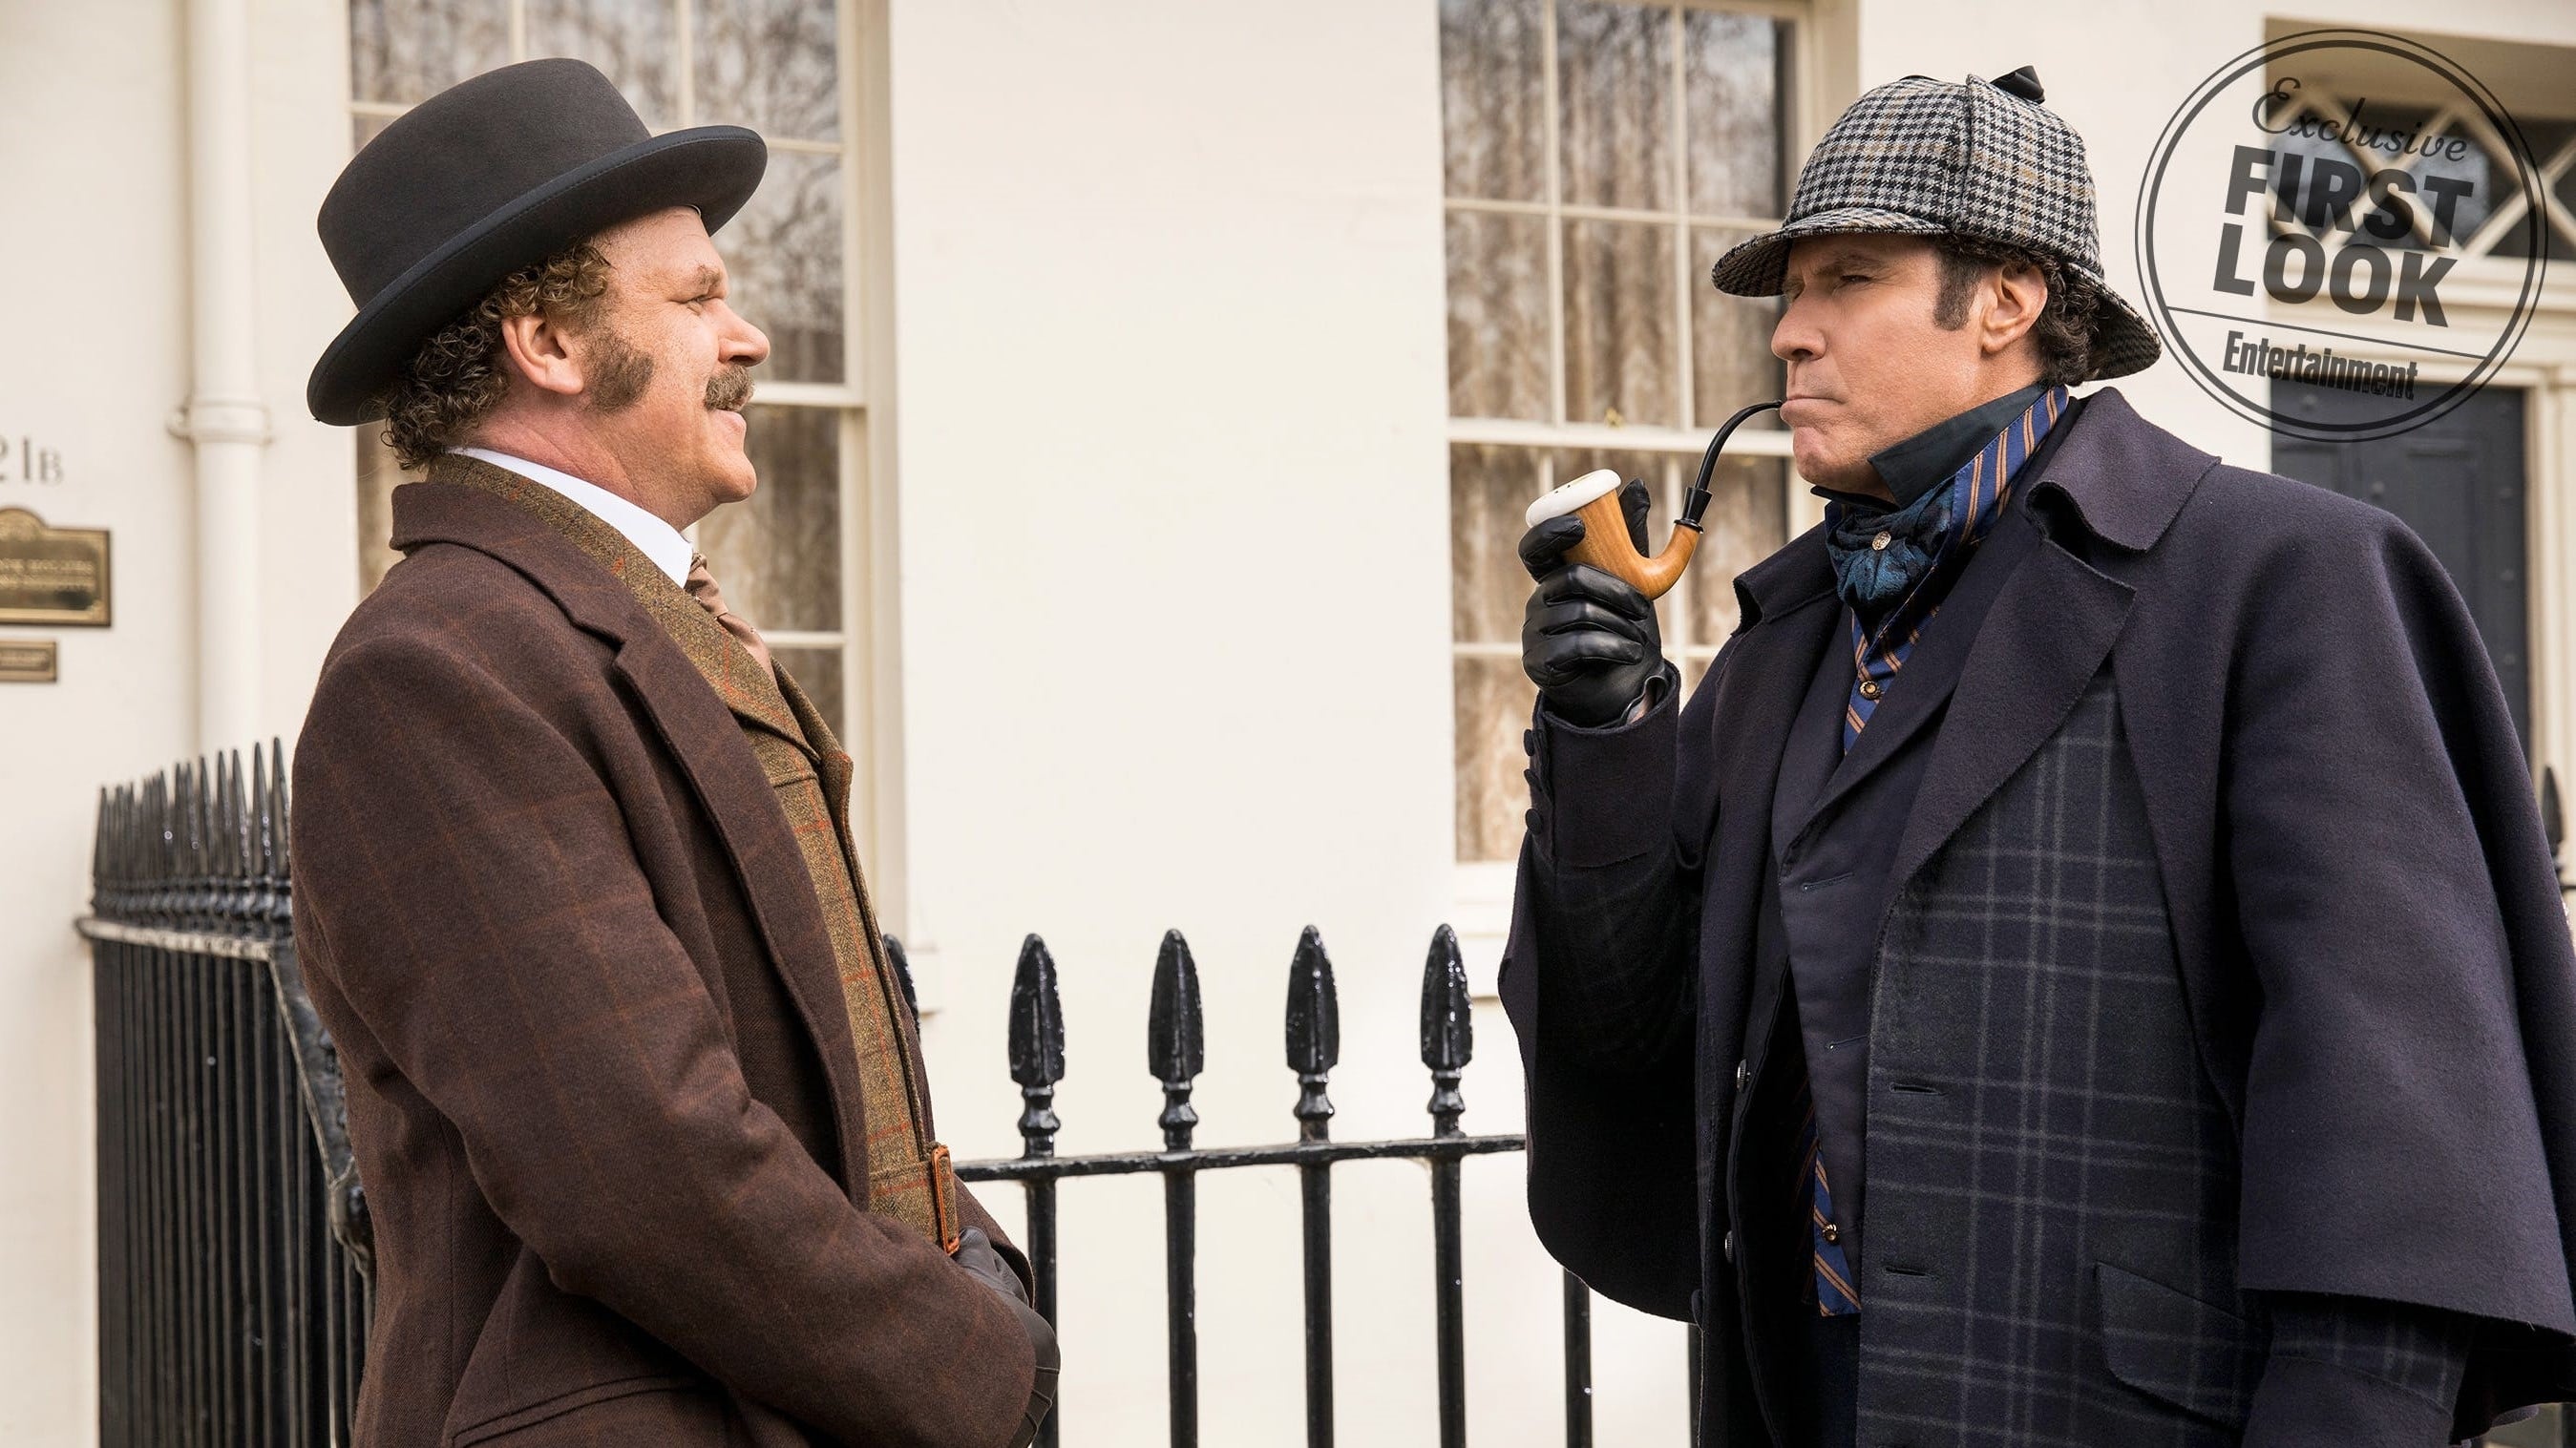 Holmes & Watson Picture